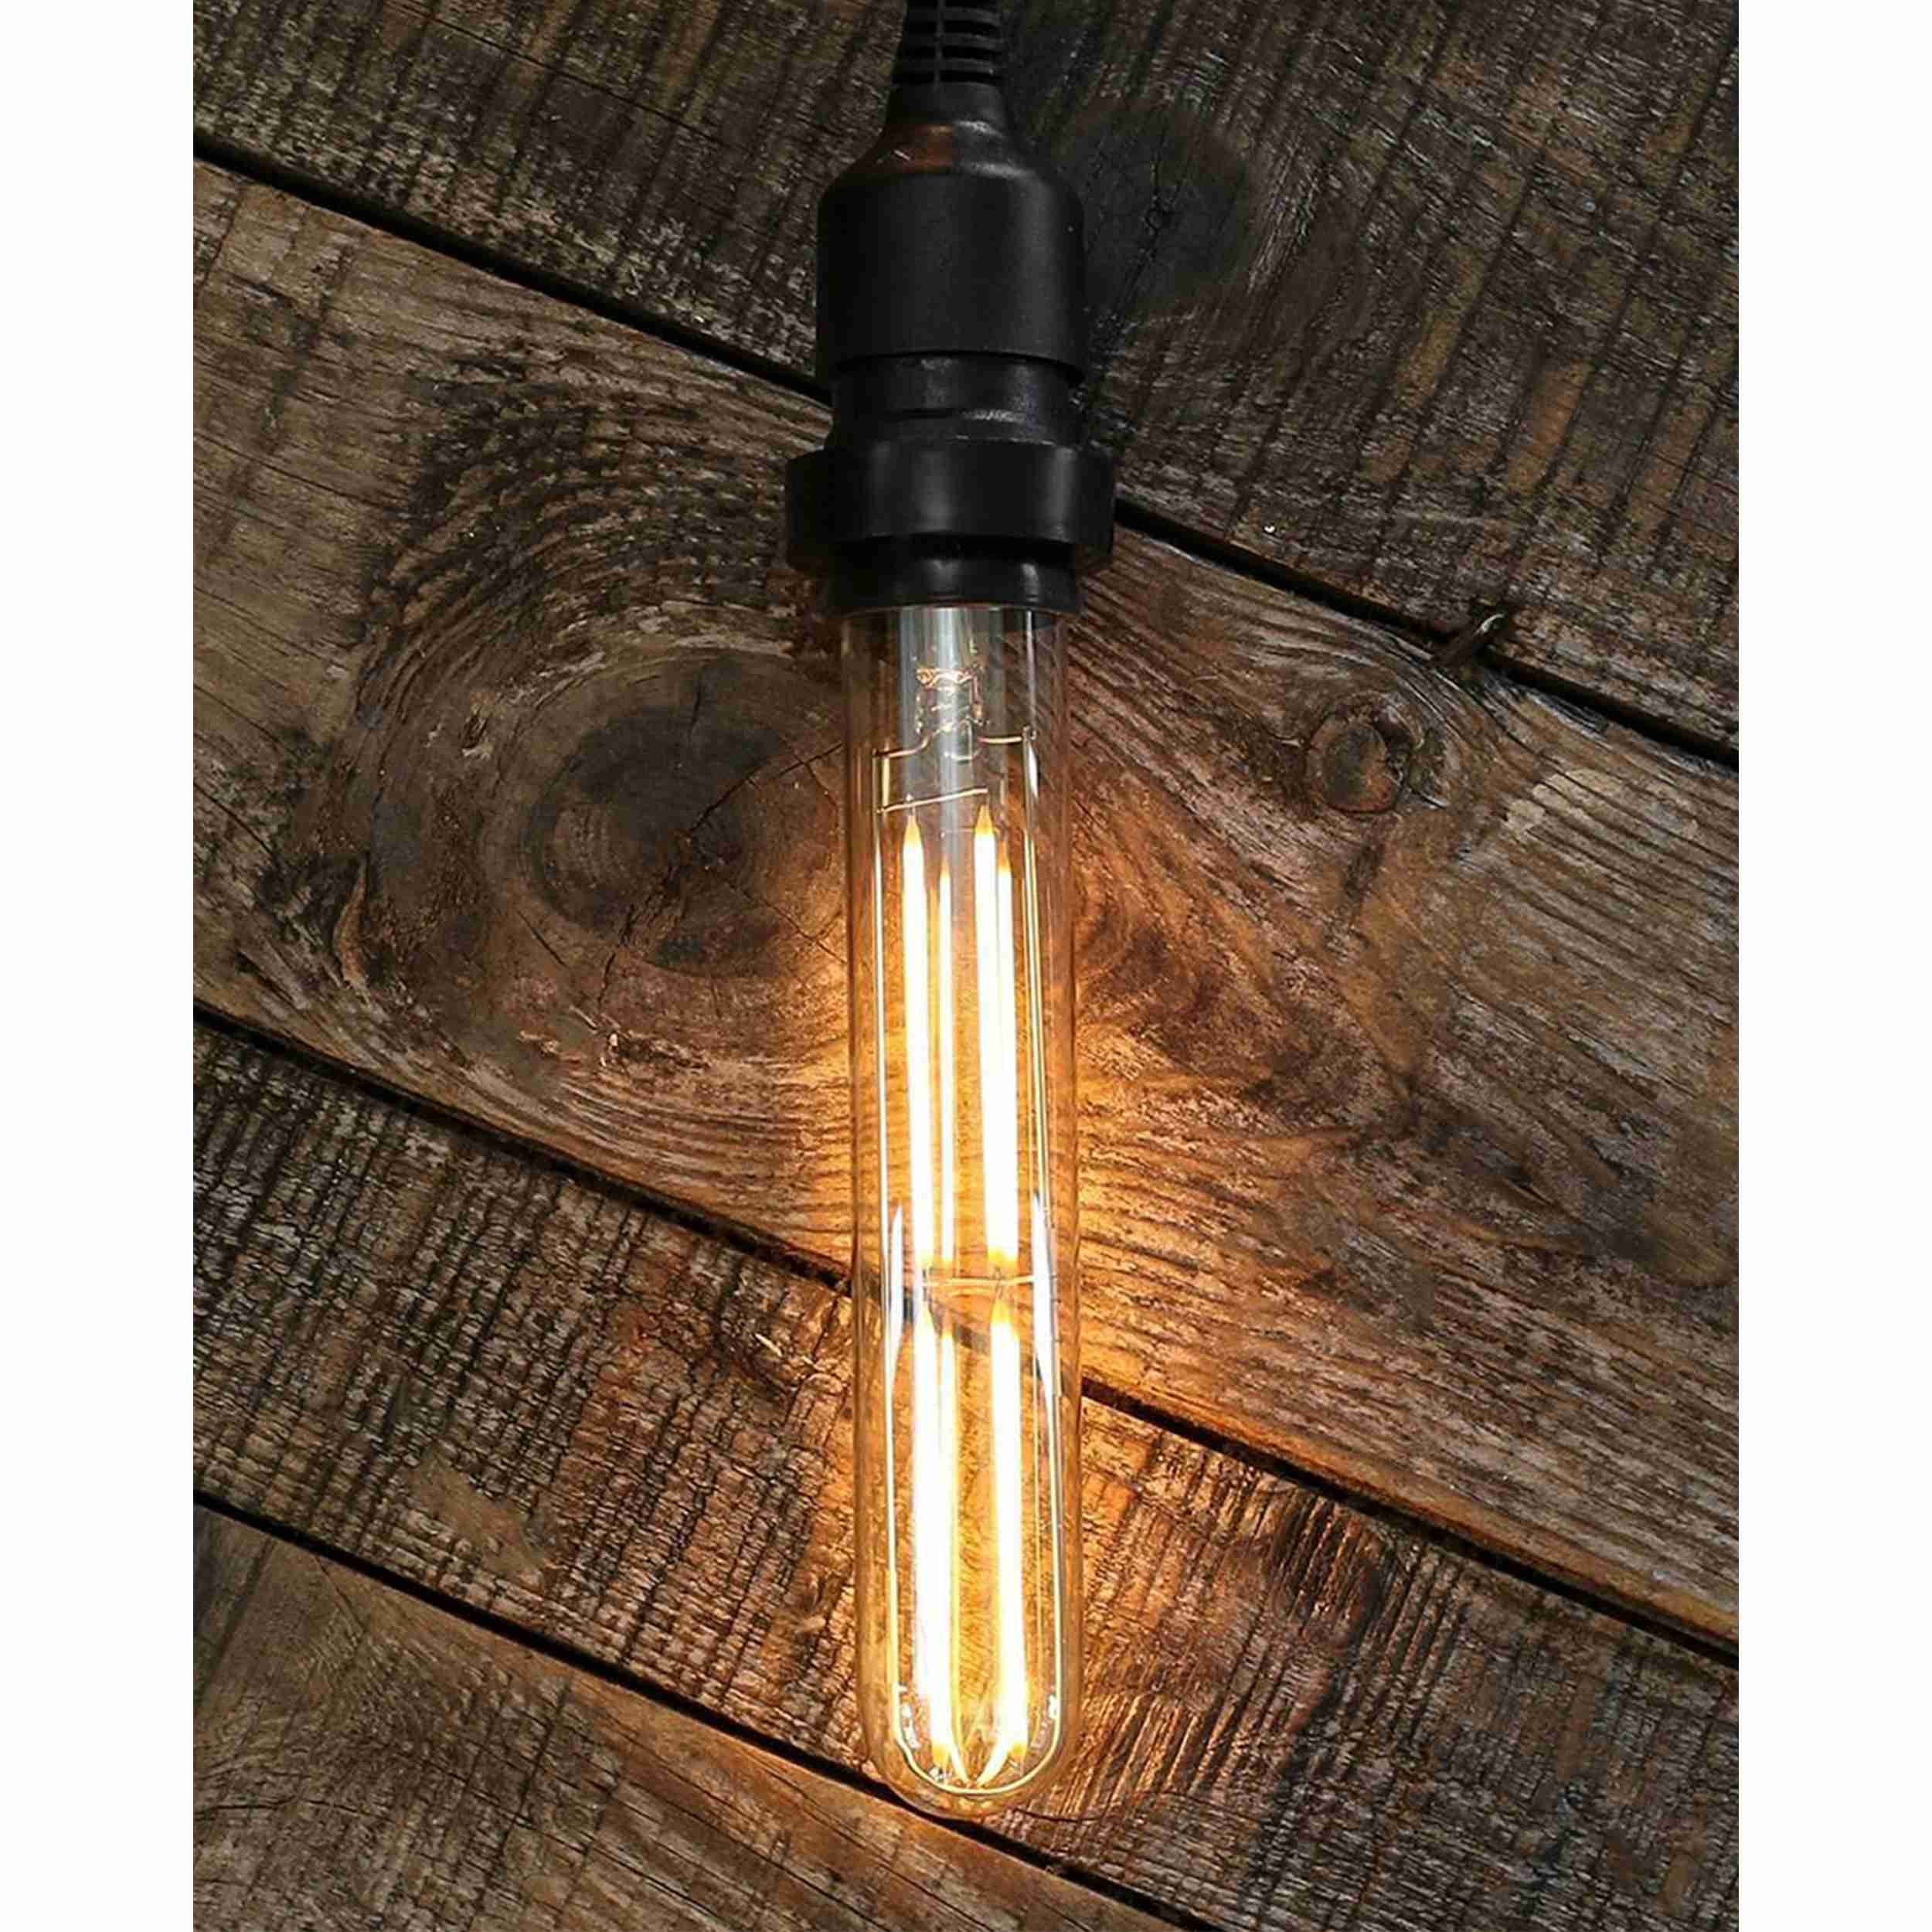 t10-led-bulb with discount code